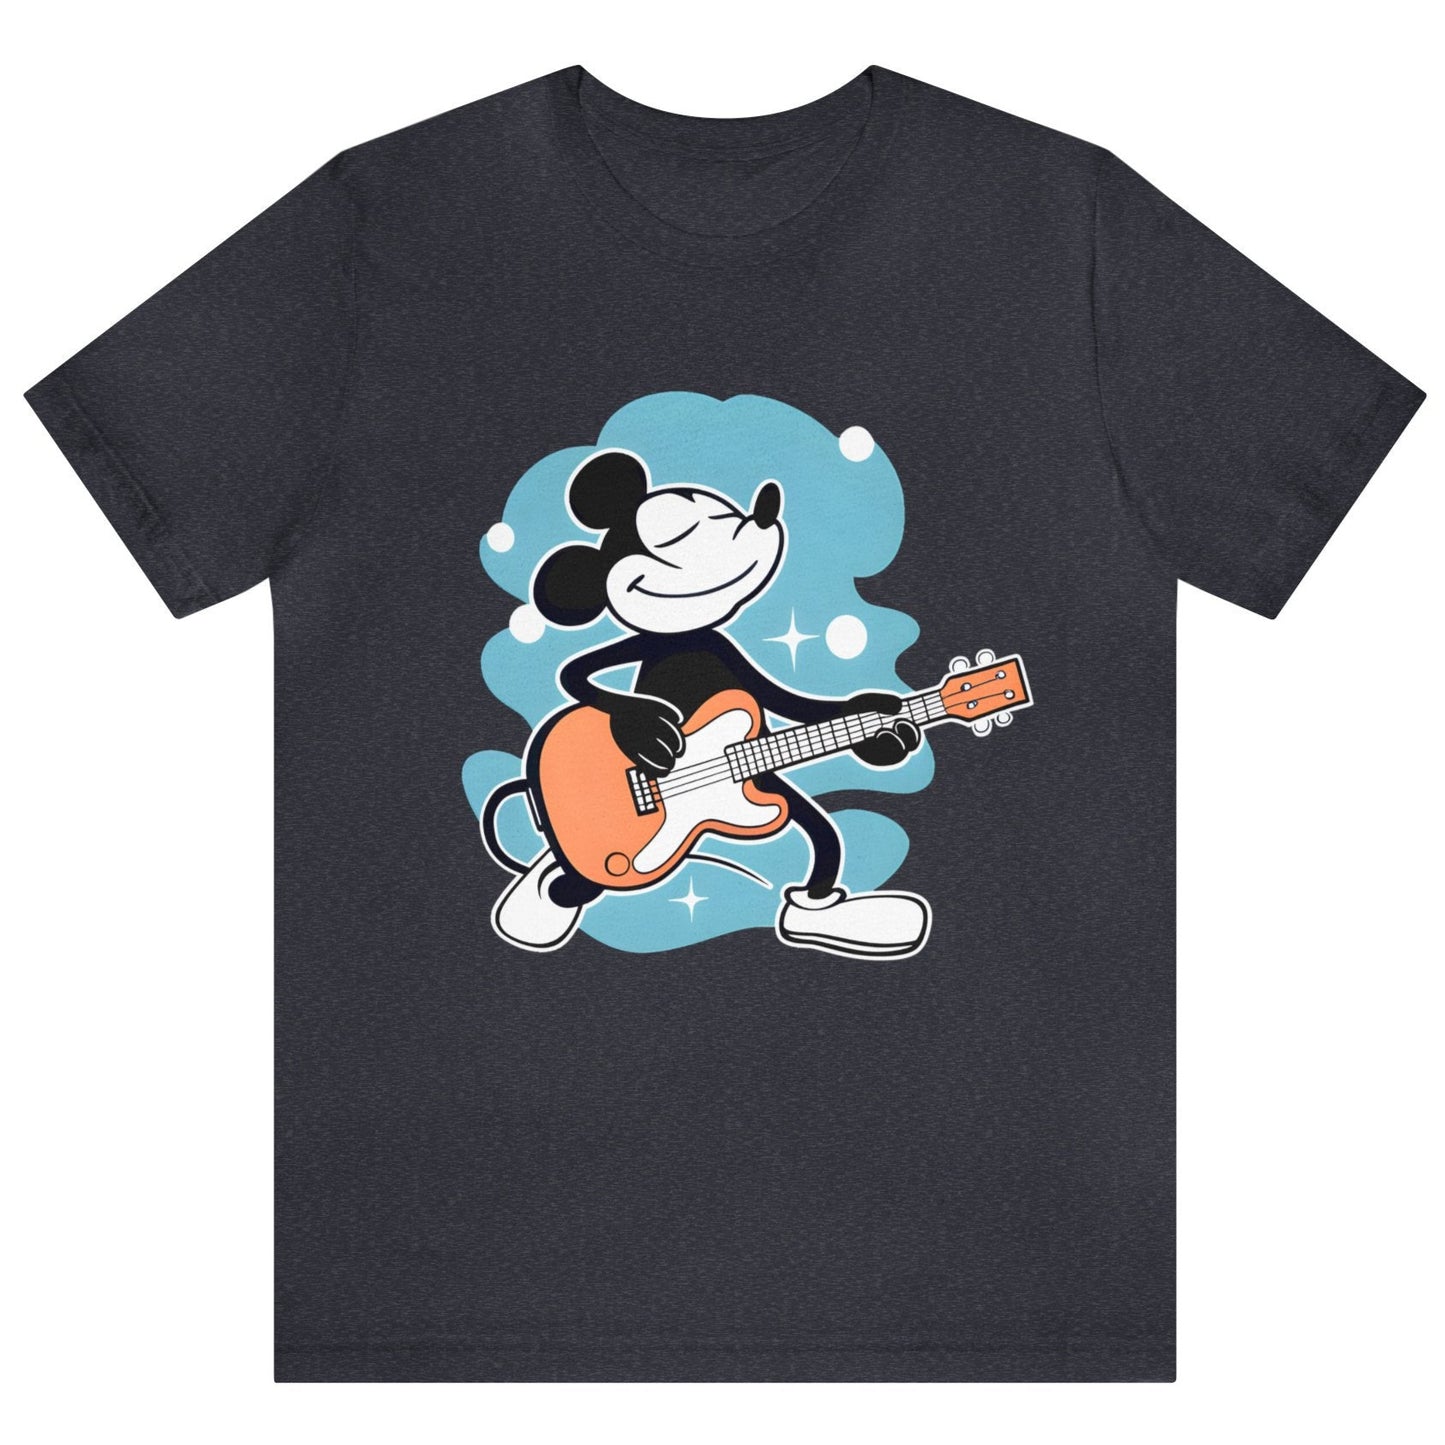 MOUSE Plays Guitar, Gift for Music or Cartoon Fan, Guitar or Bass Player, Animation Fan on Unisex Bella+Canvas Tee, Dark Colors